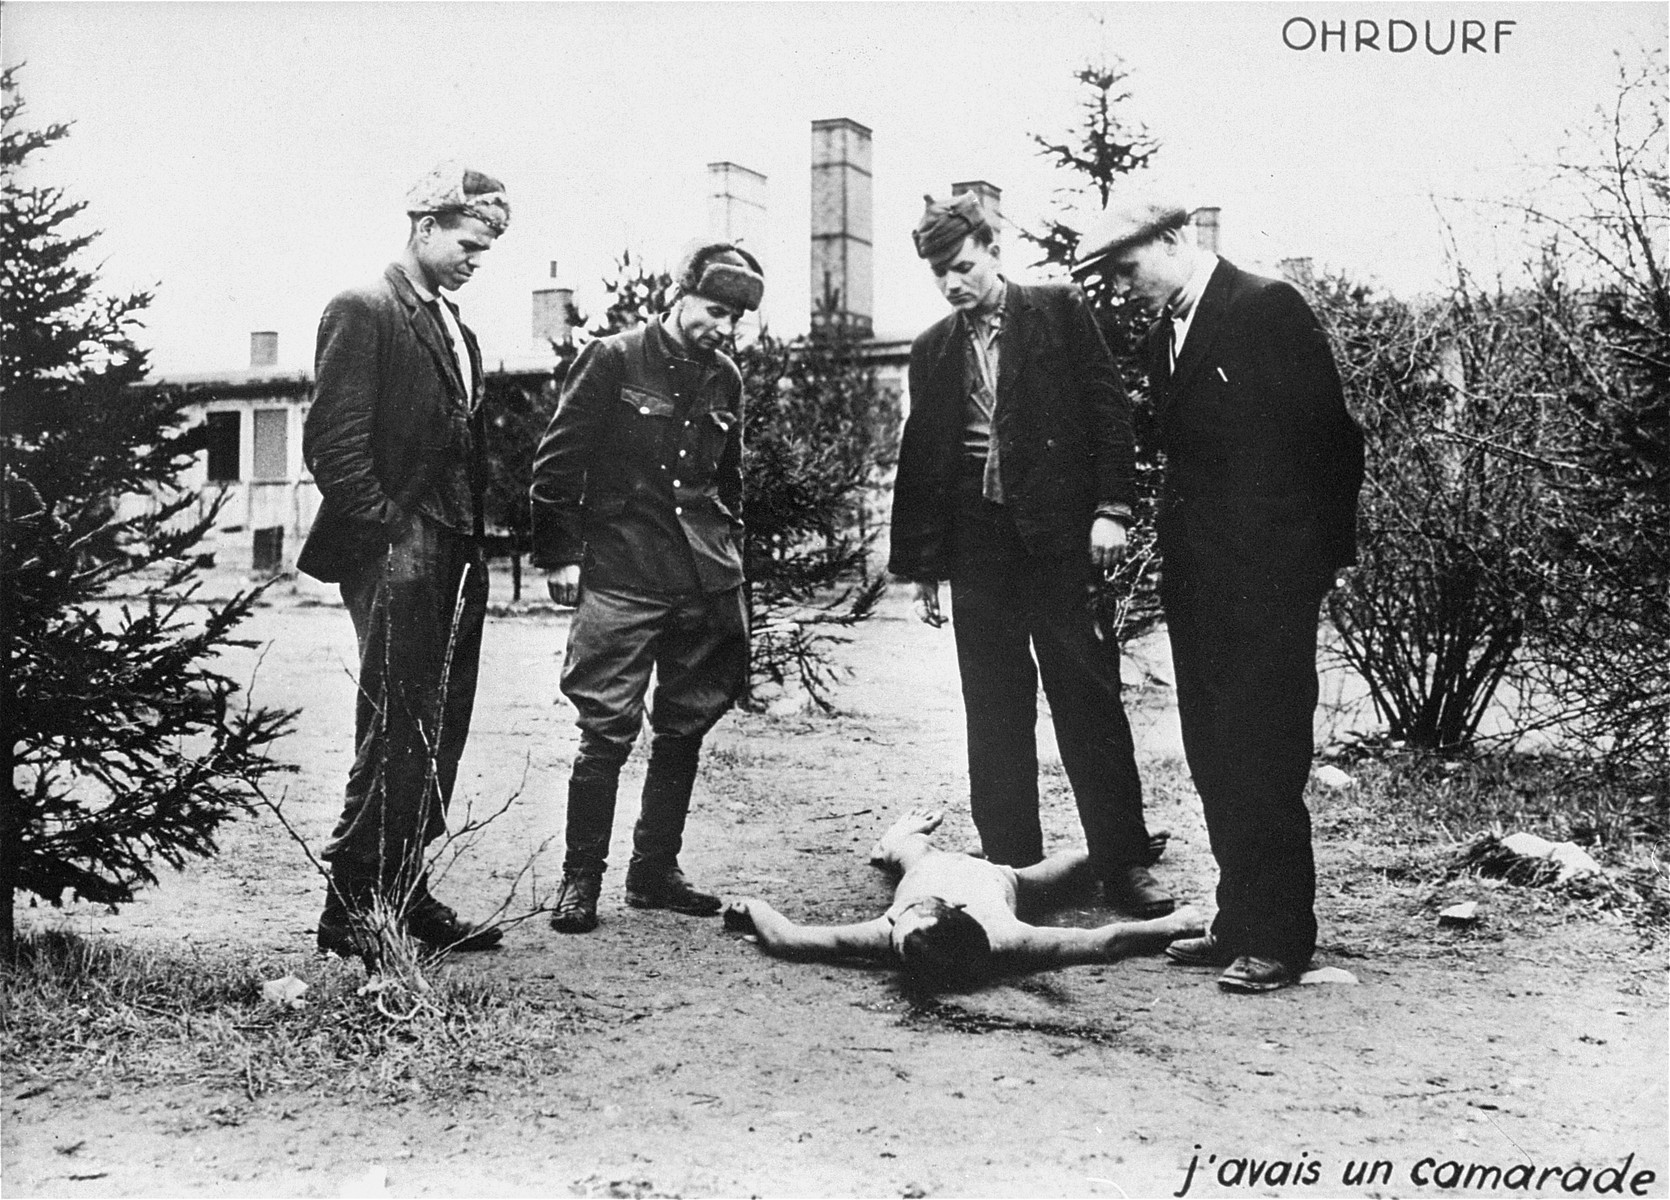 Survivors in Ohrdruf beside the corpse of one of their friends.